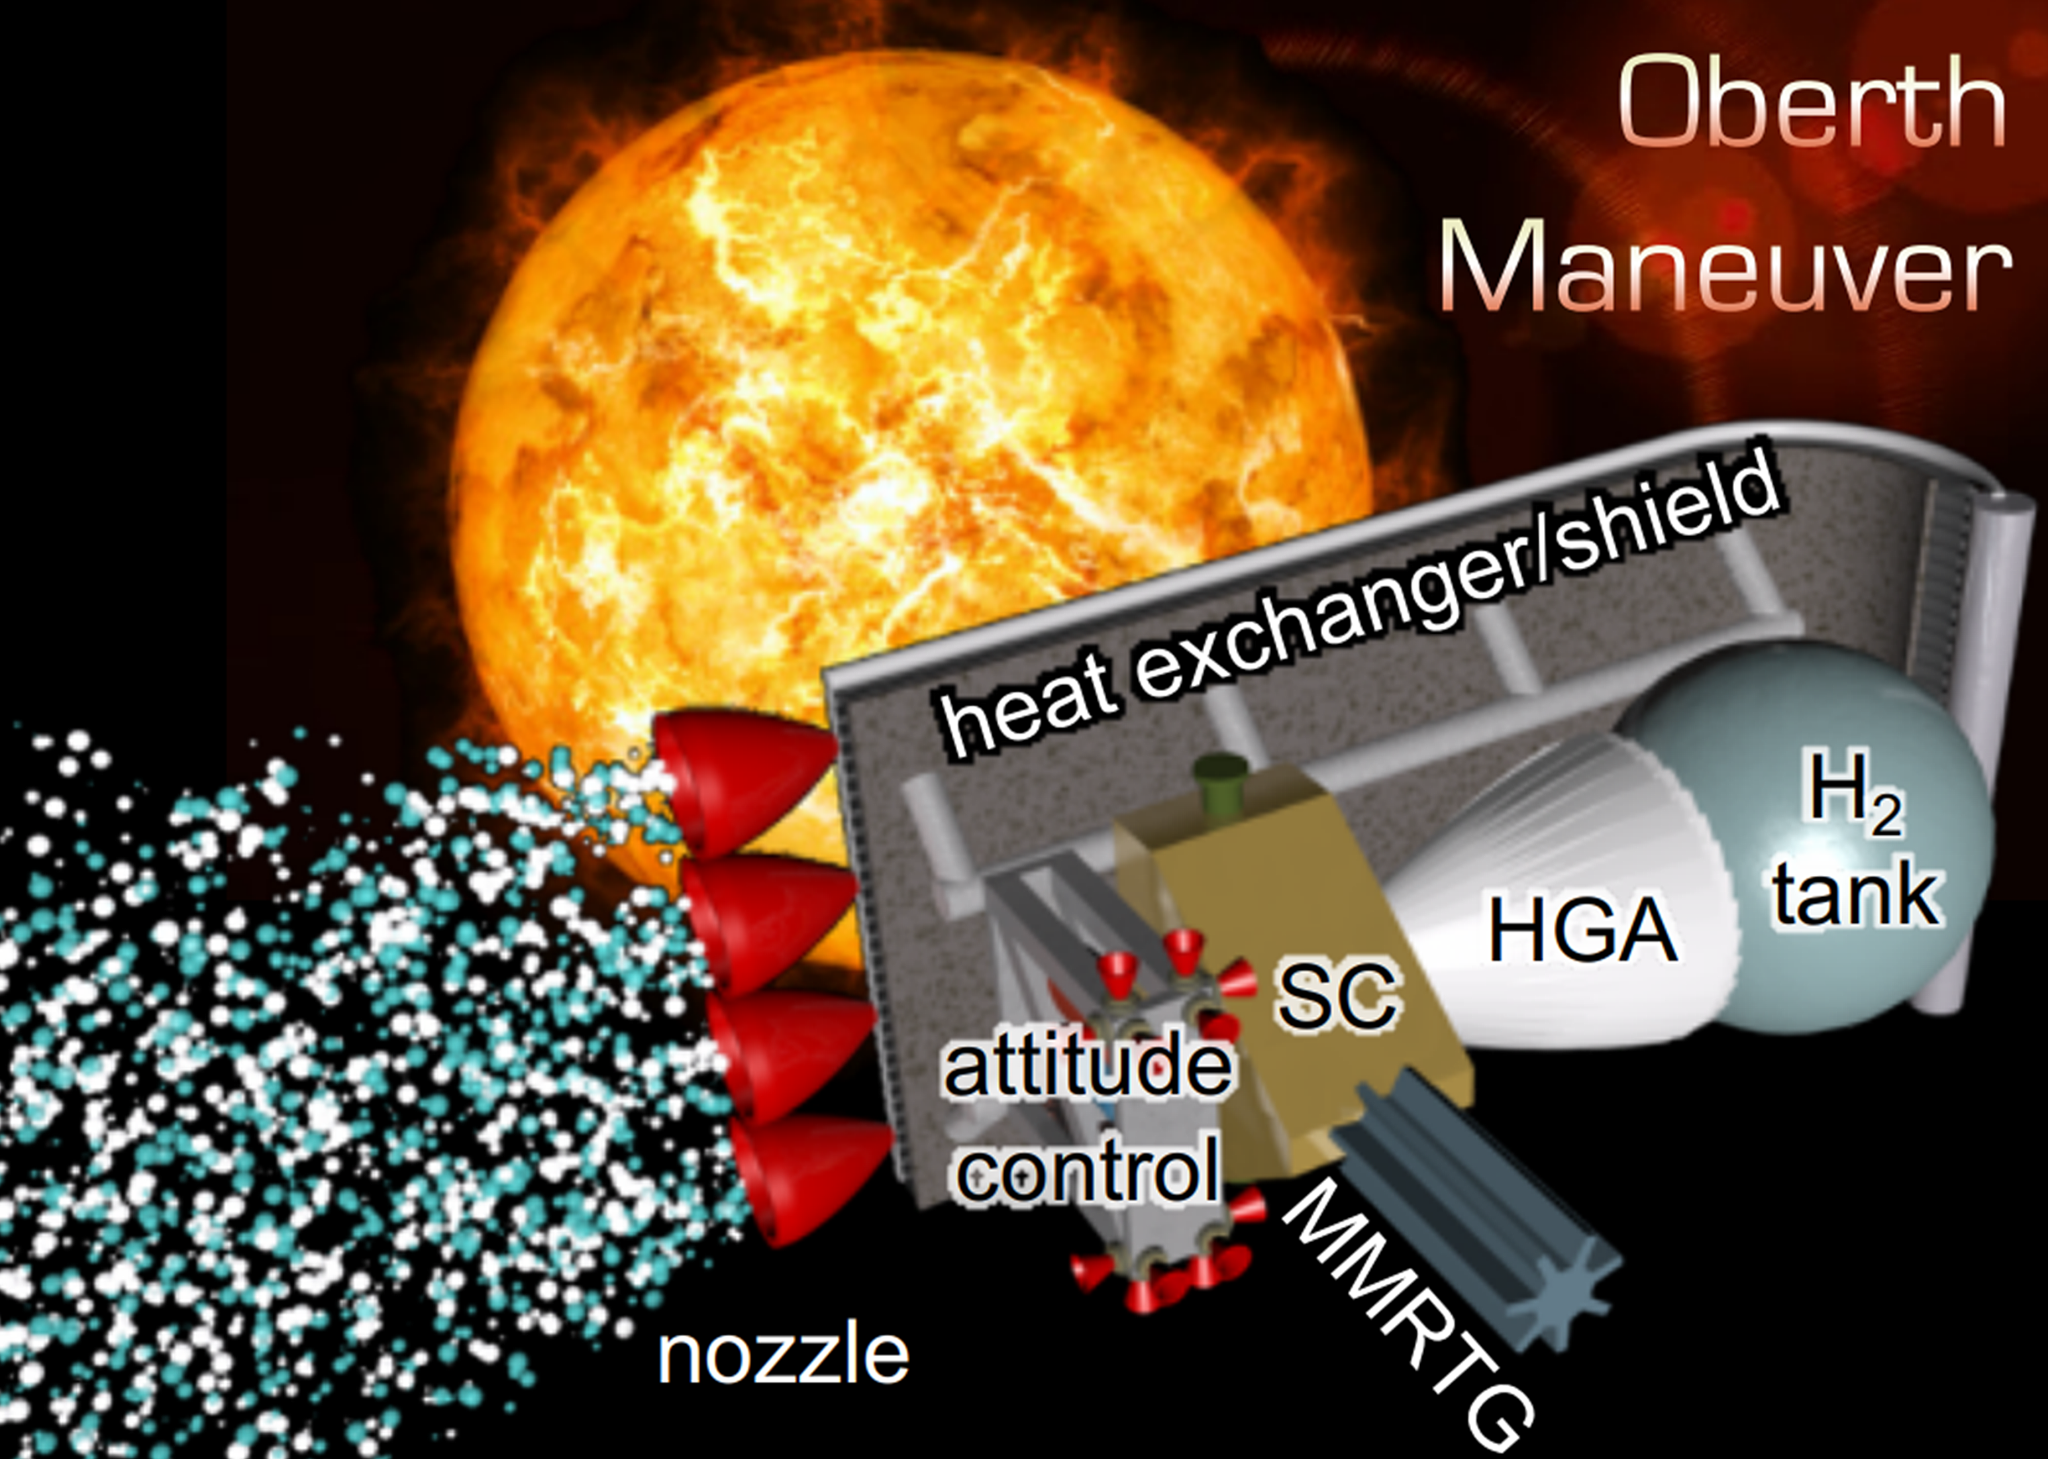 Combined Heat Shield and Solar Thermal Propulsion System